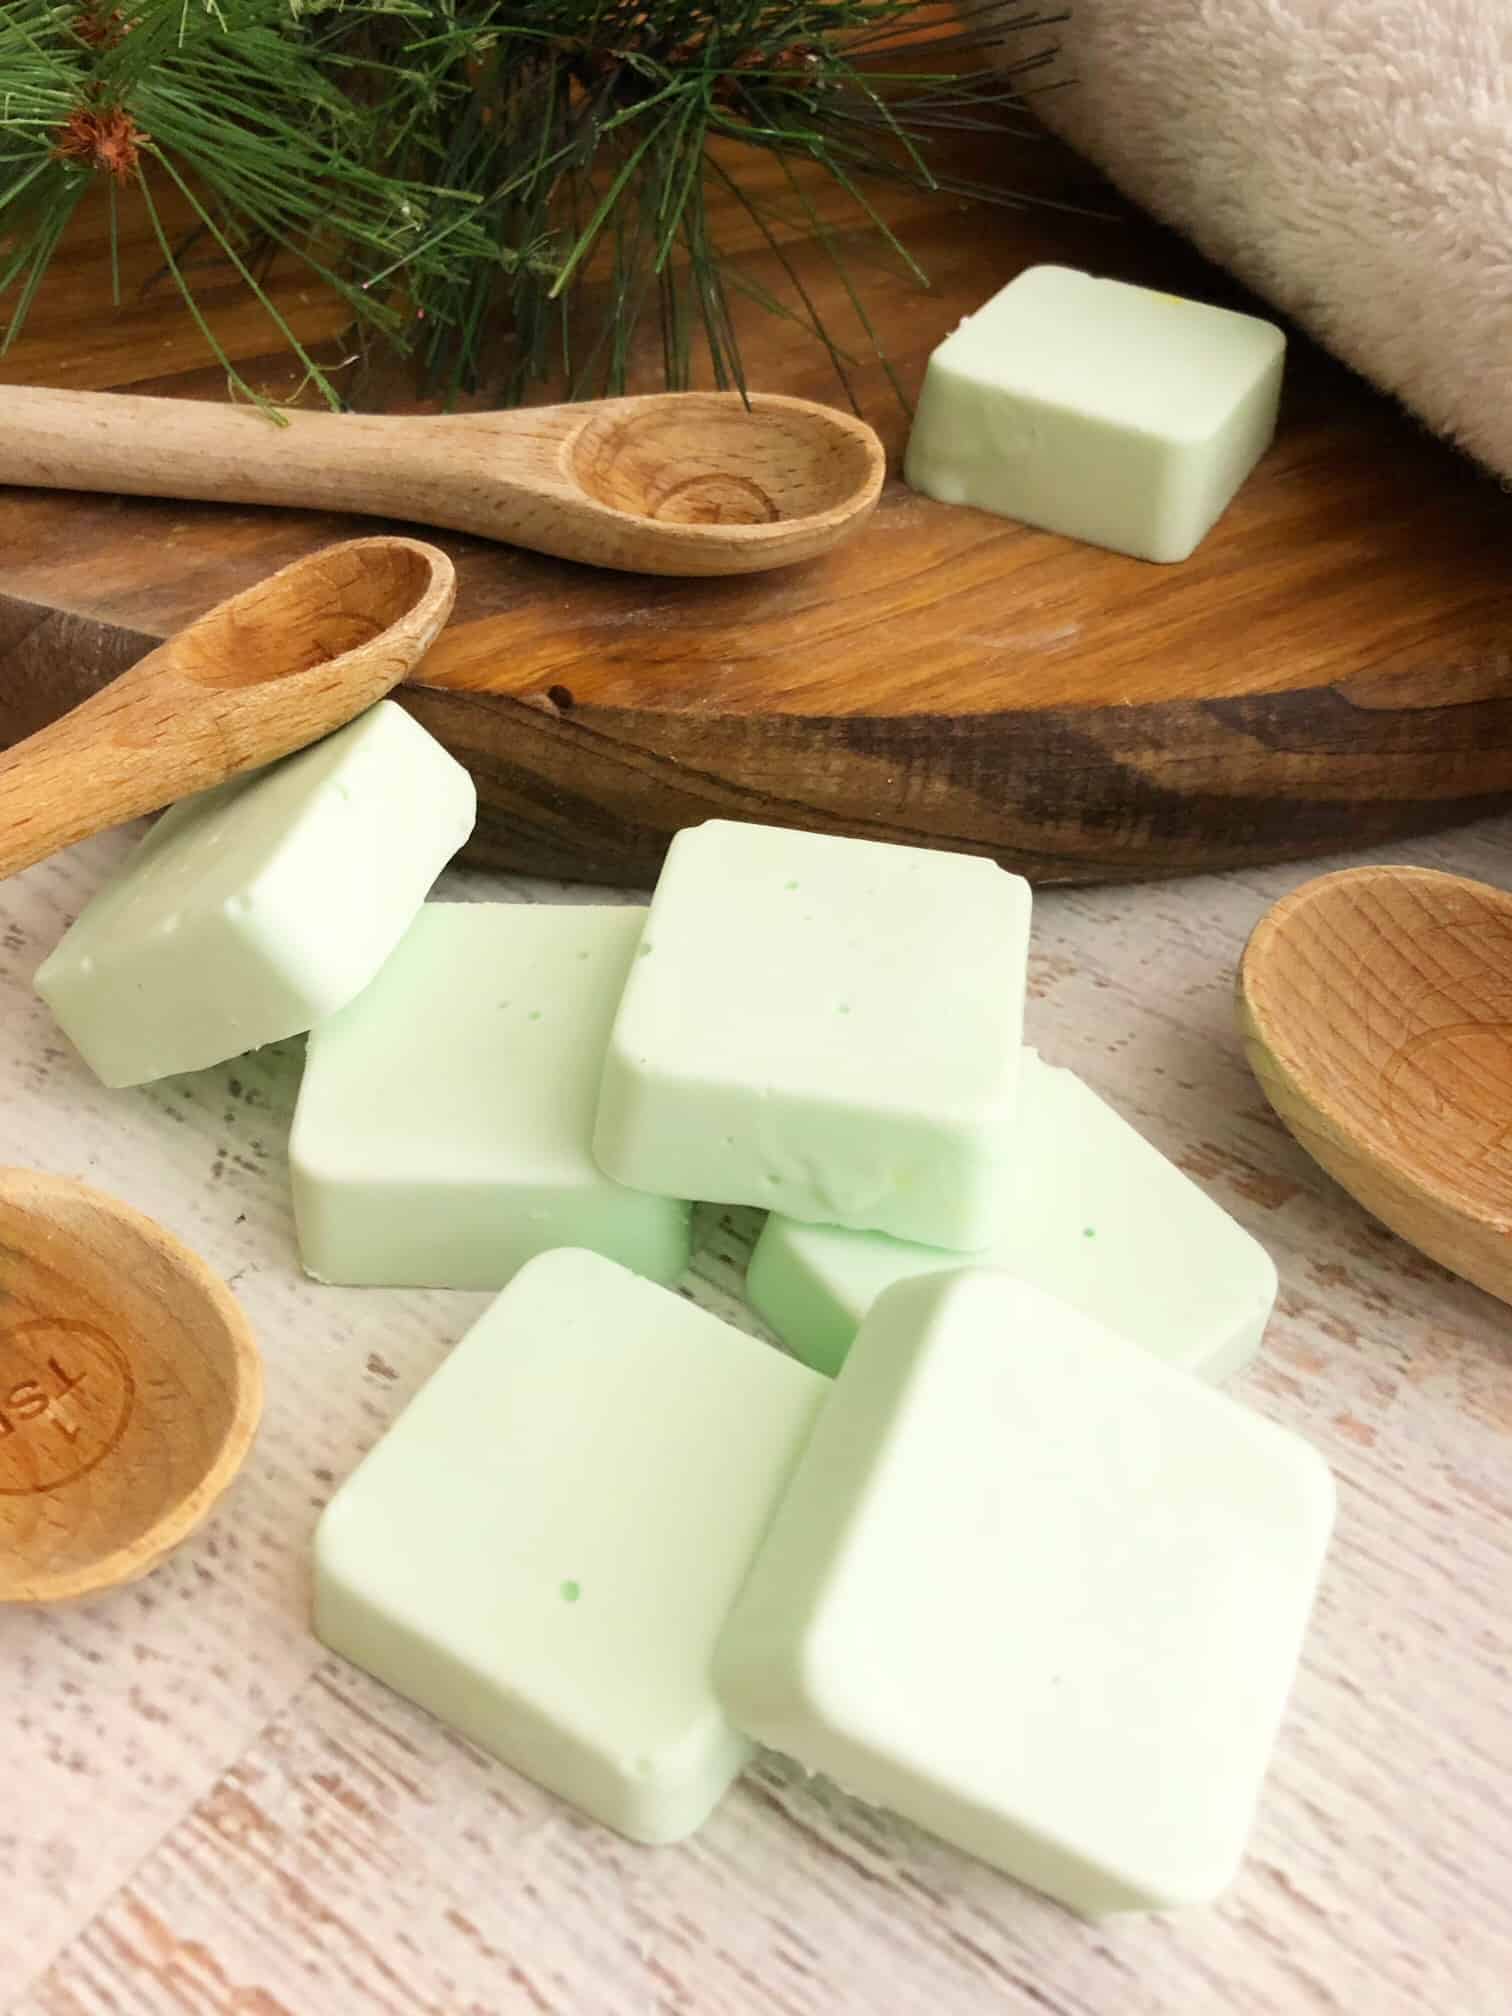 The best shower melts recipe that is similar to a shower soothers DIY. This shower steamers recipe is great if you are curious how to use essential oils in the shower!